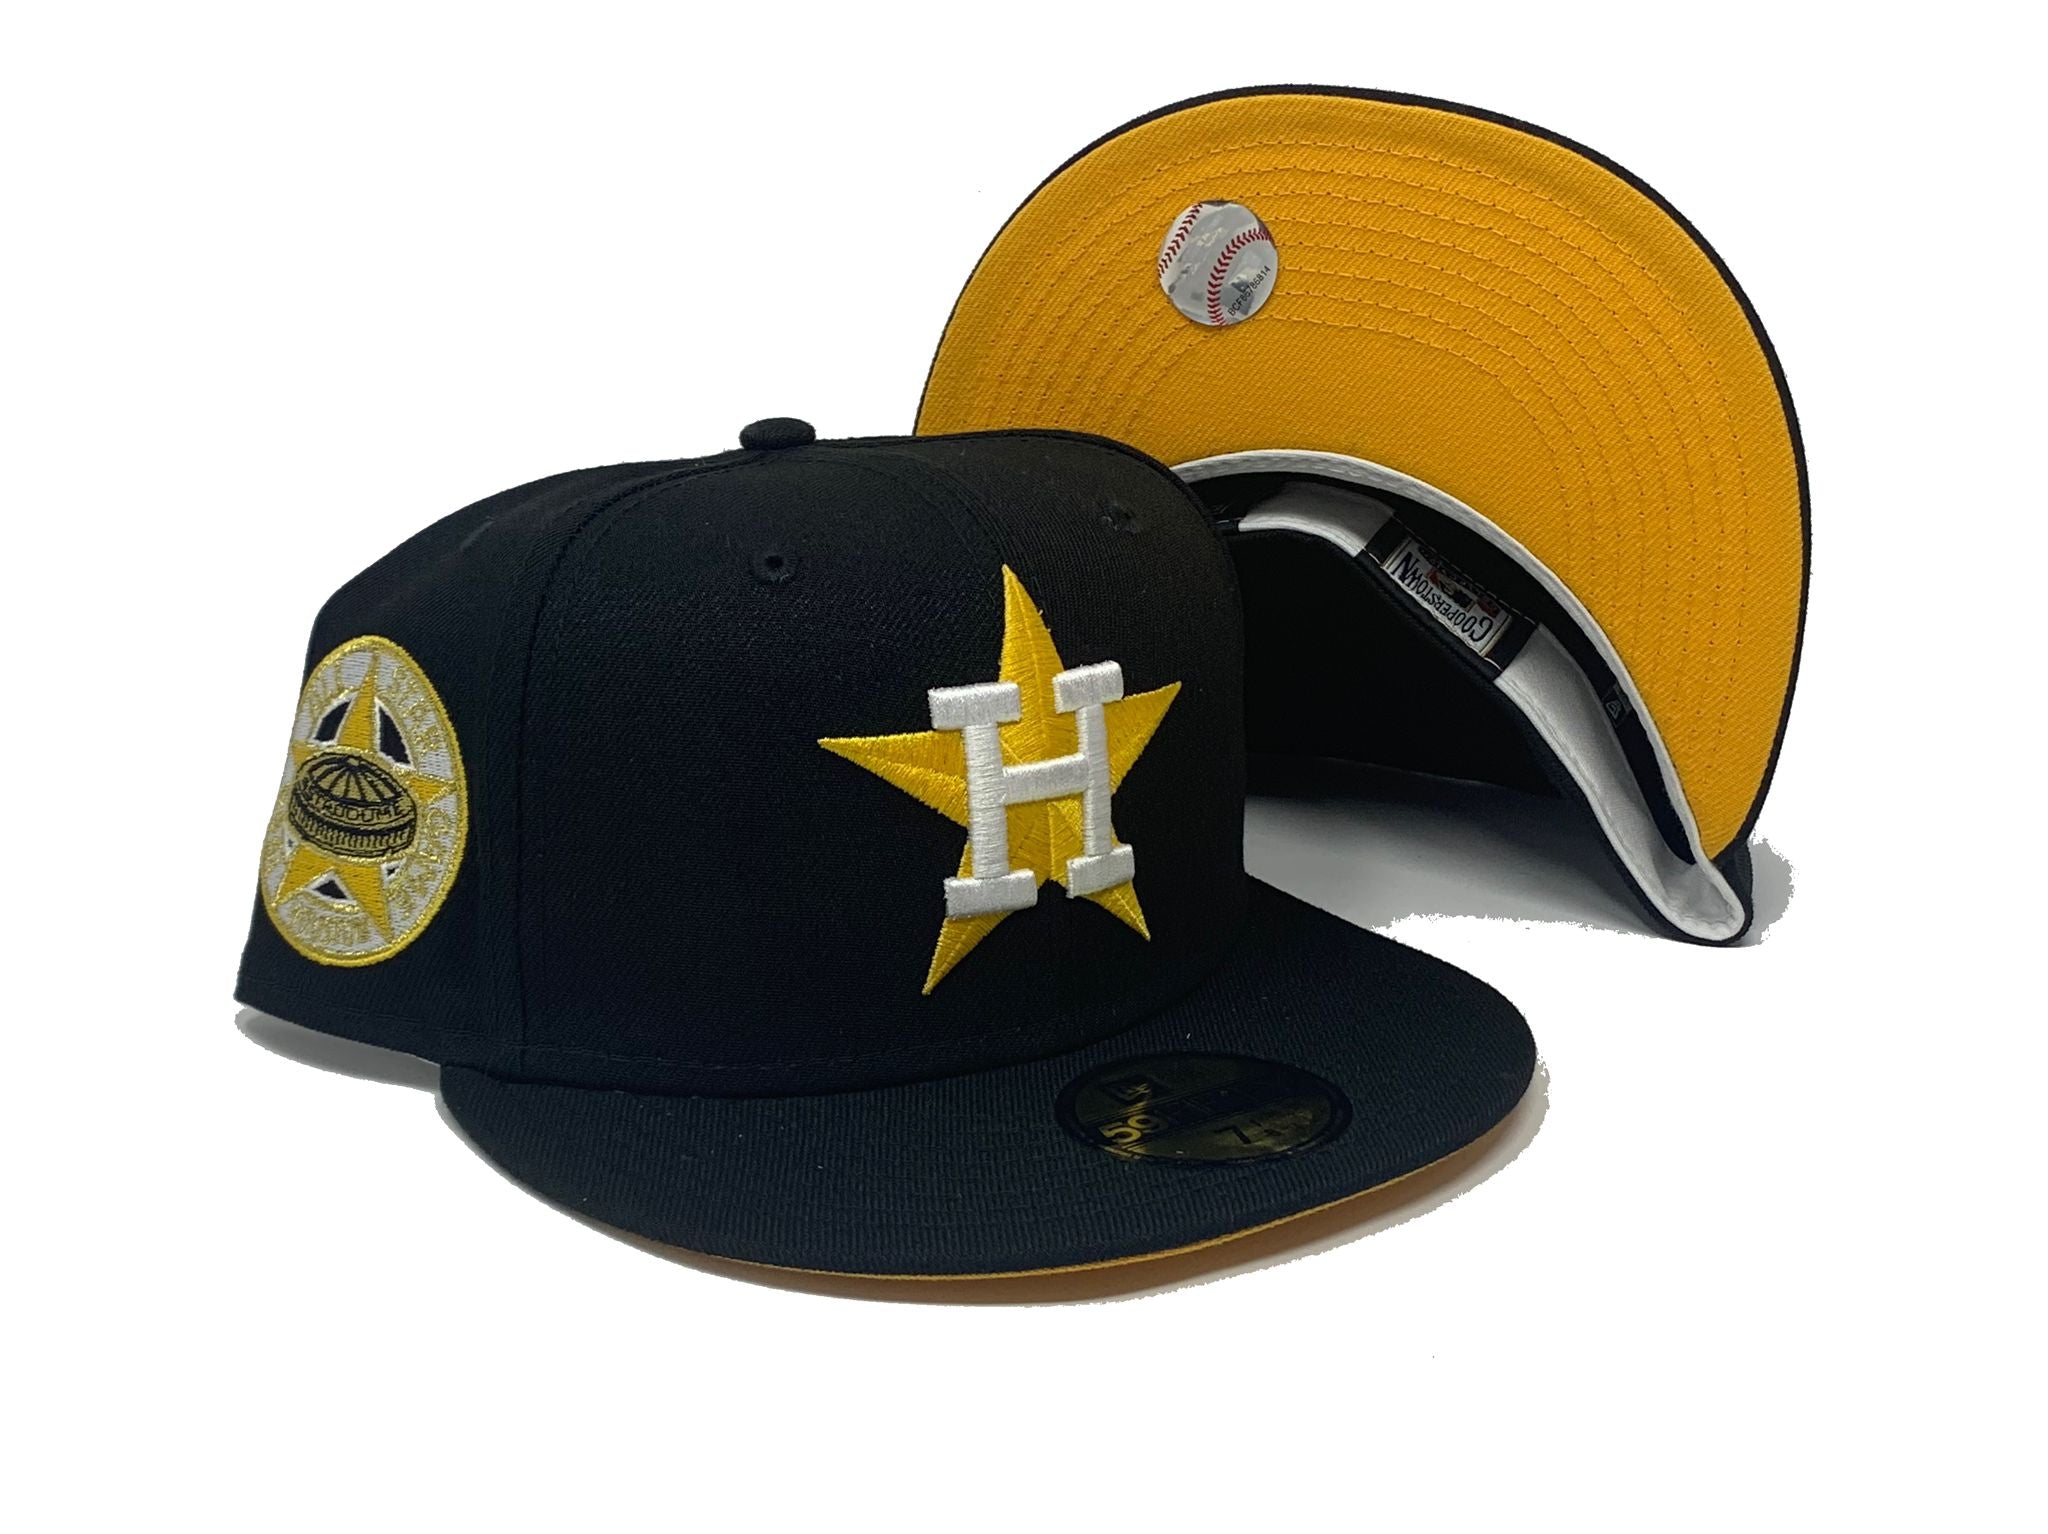 Houston Astros All Star Game Fitted New Era 59FIFTY Hat